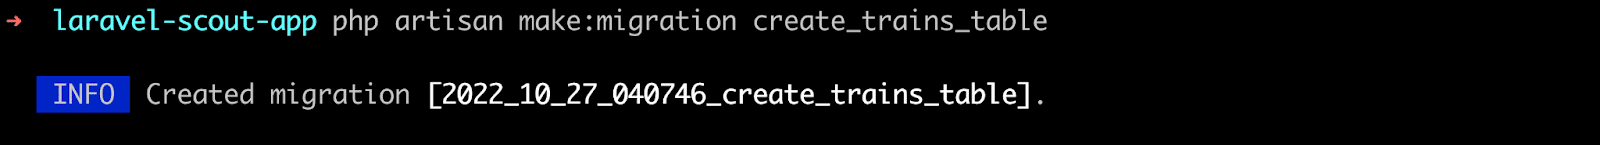 Making a migration named create_trains_table